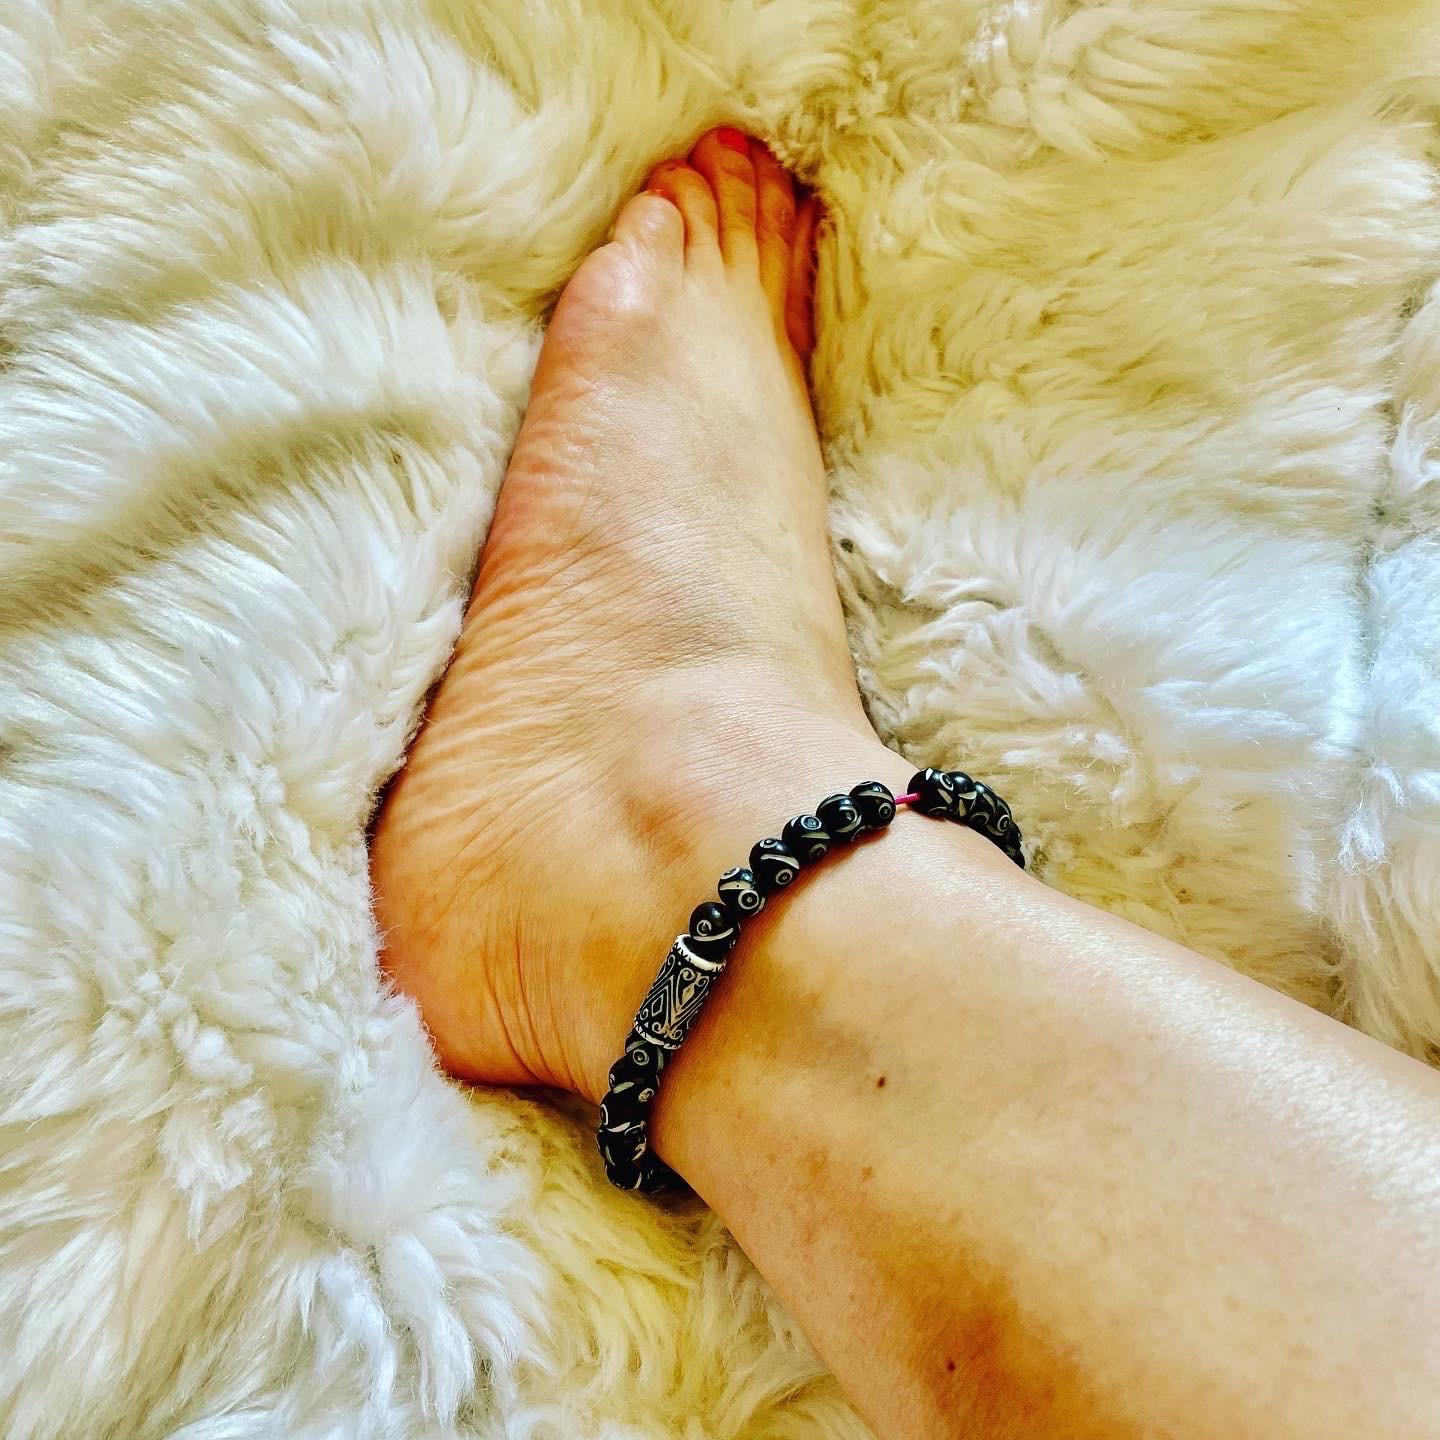 b'Rustic Black & White Bead Stretch Anklet #1' for sale  